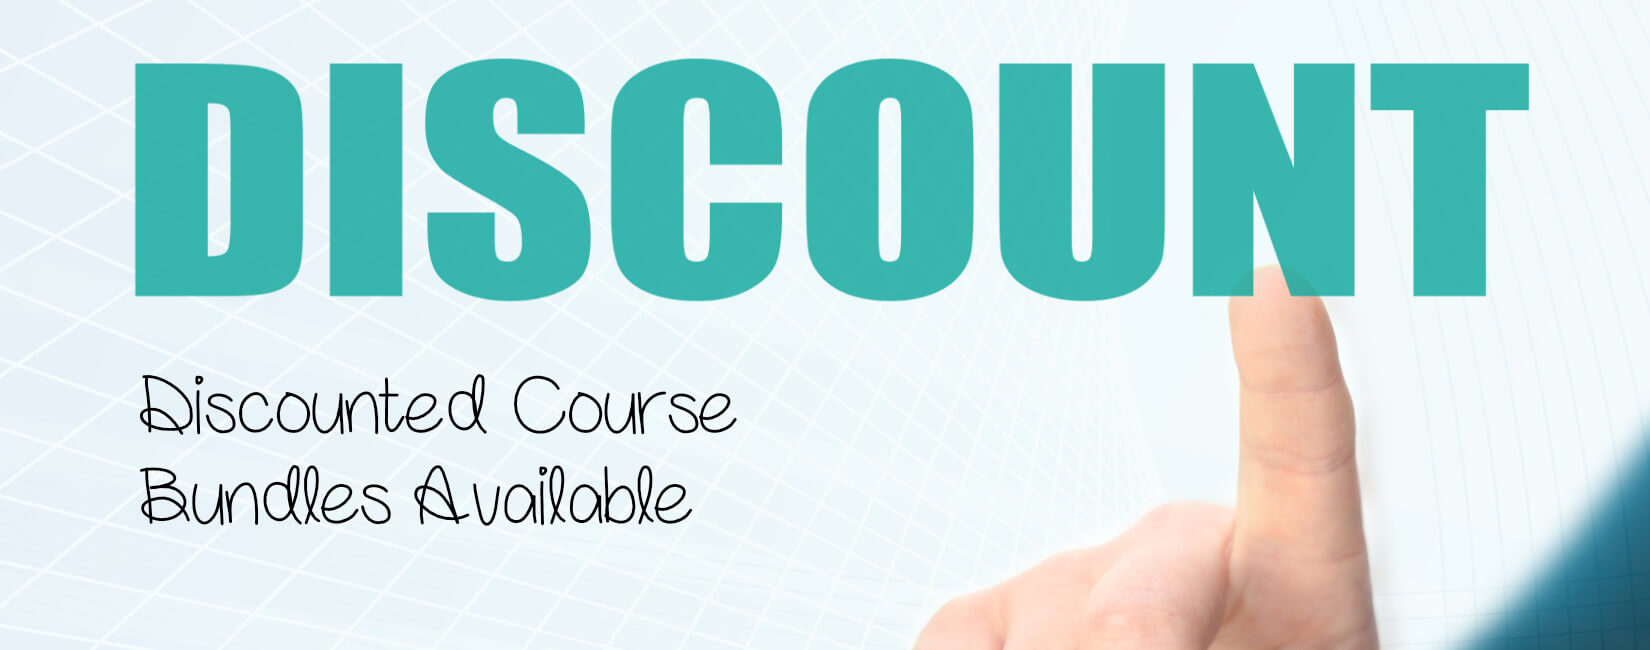 Discounted course bundles available